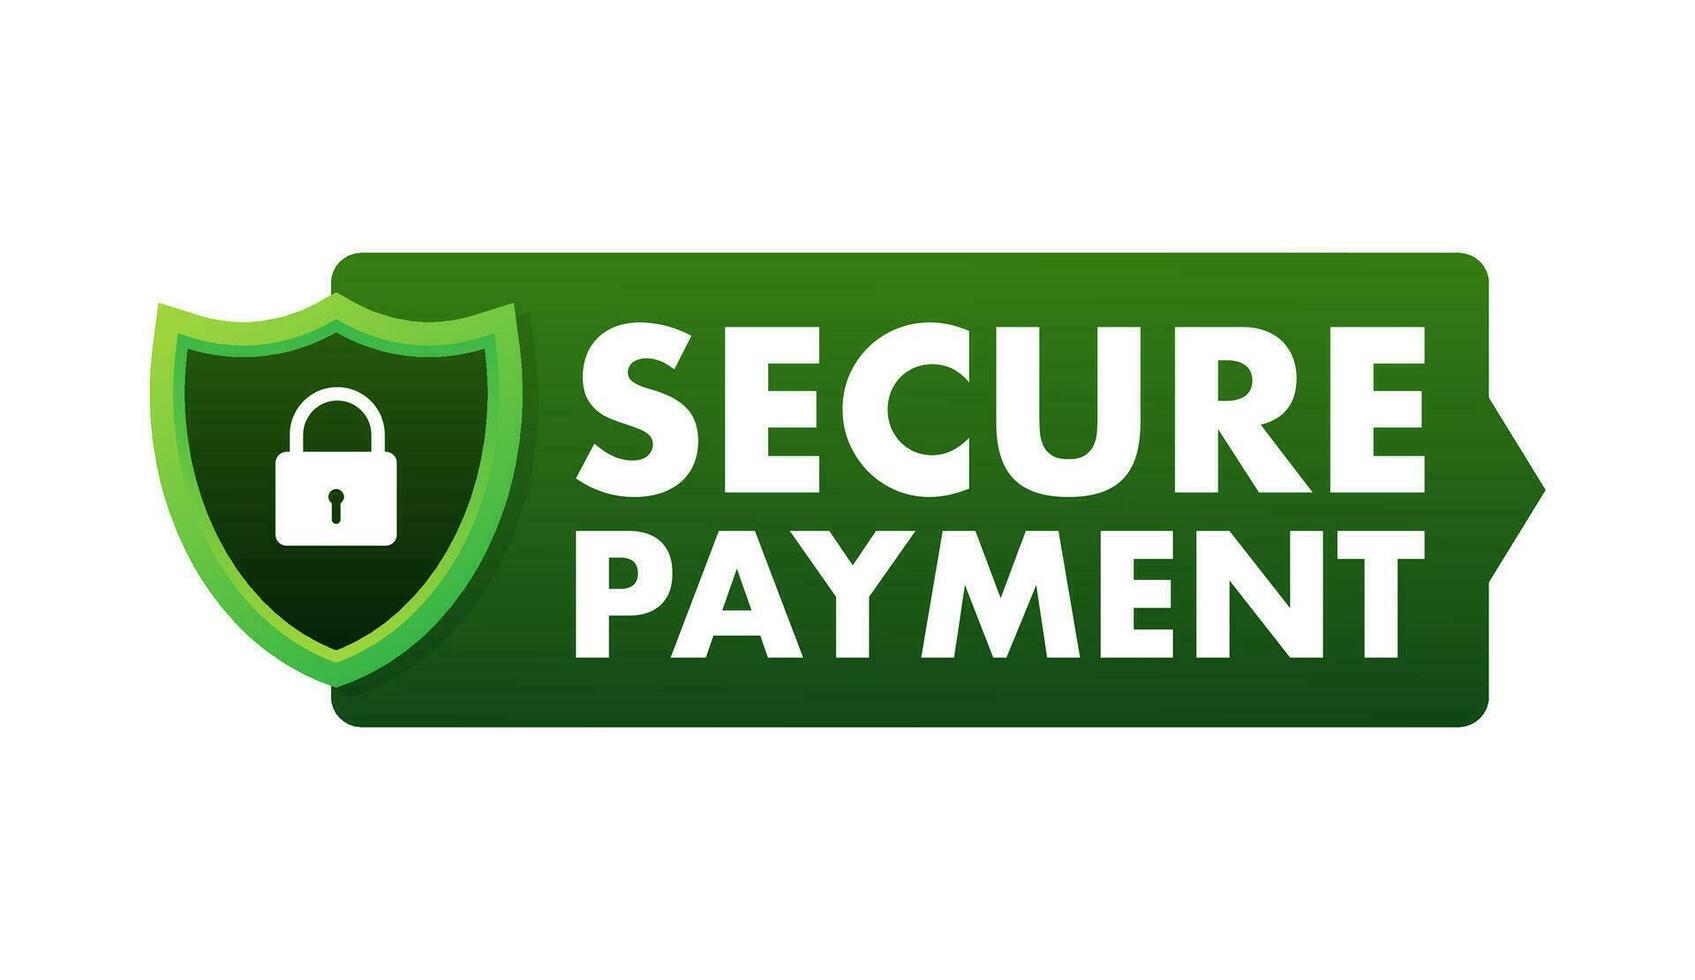 Secure payment. Credit card icon with shield. Secure transaction. Vector stock illustration